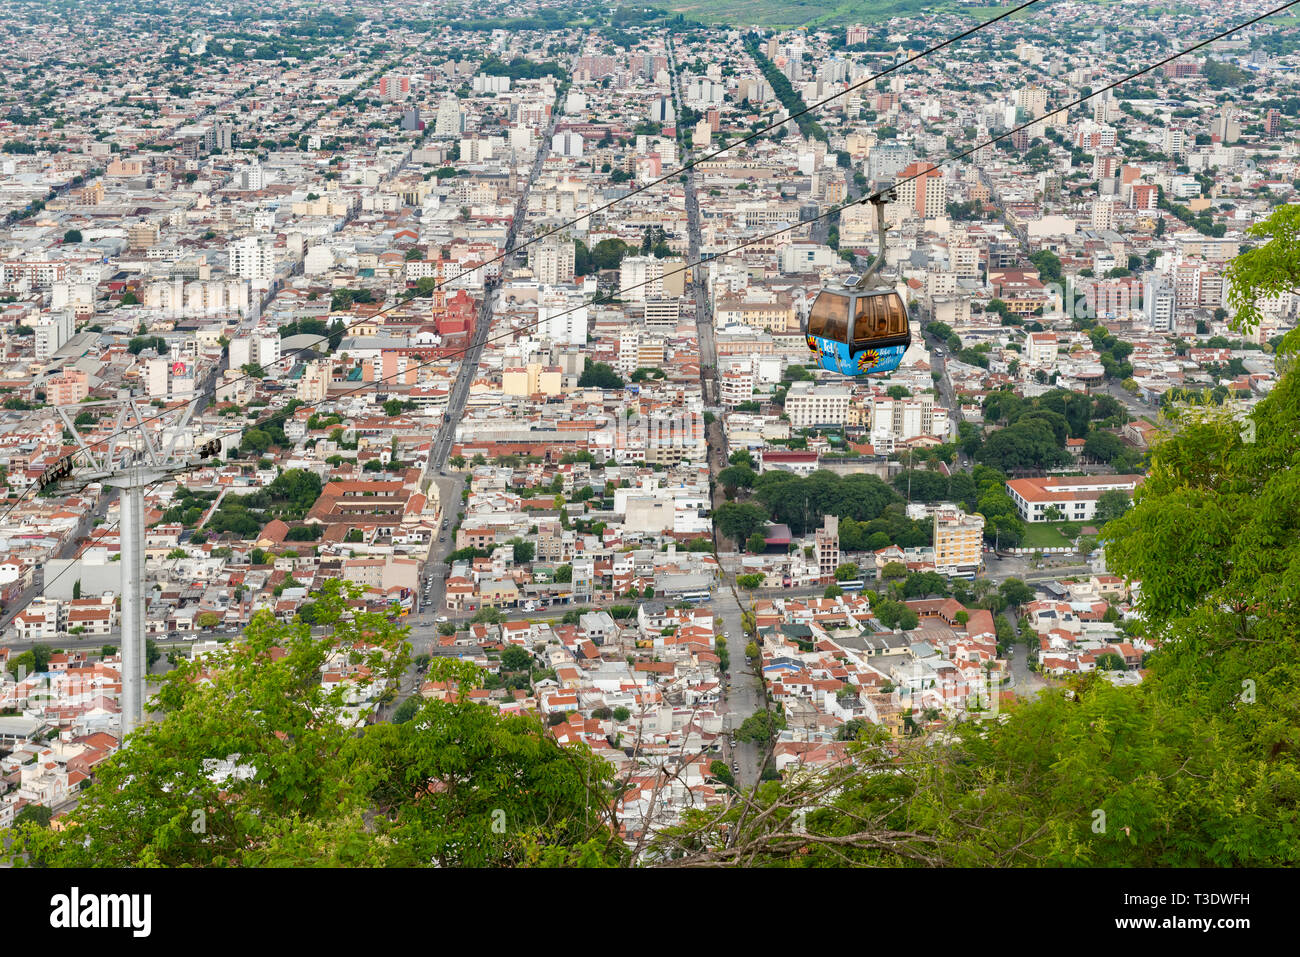 Images of the Salta Tram (Teleferico) cable cars   above the city, from the top of the San Bernardo Hill. Stock Photo